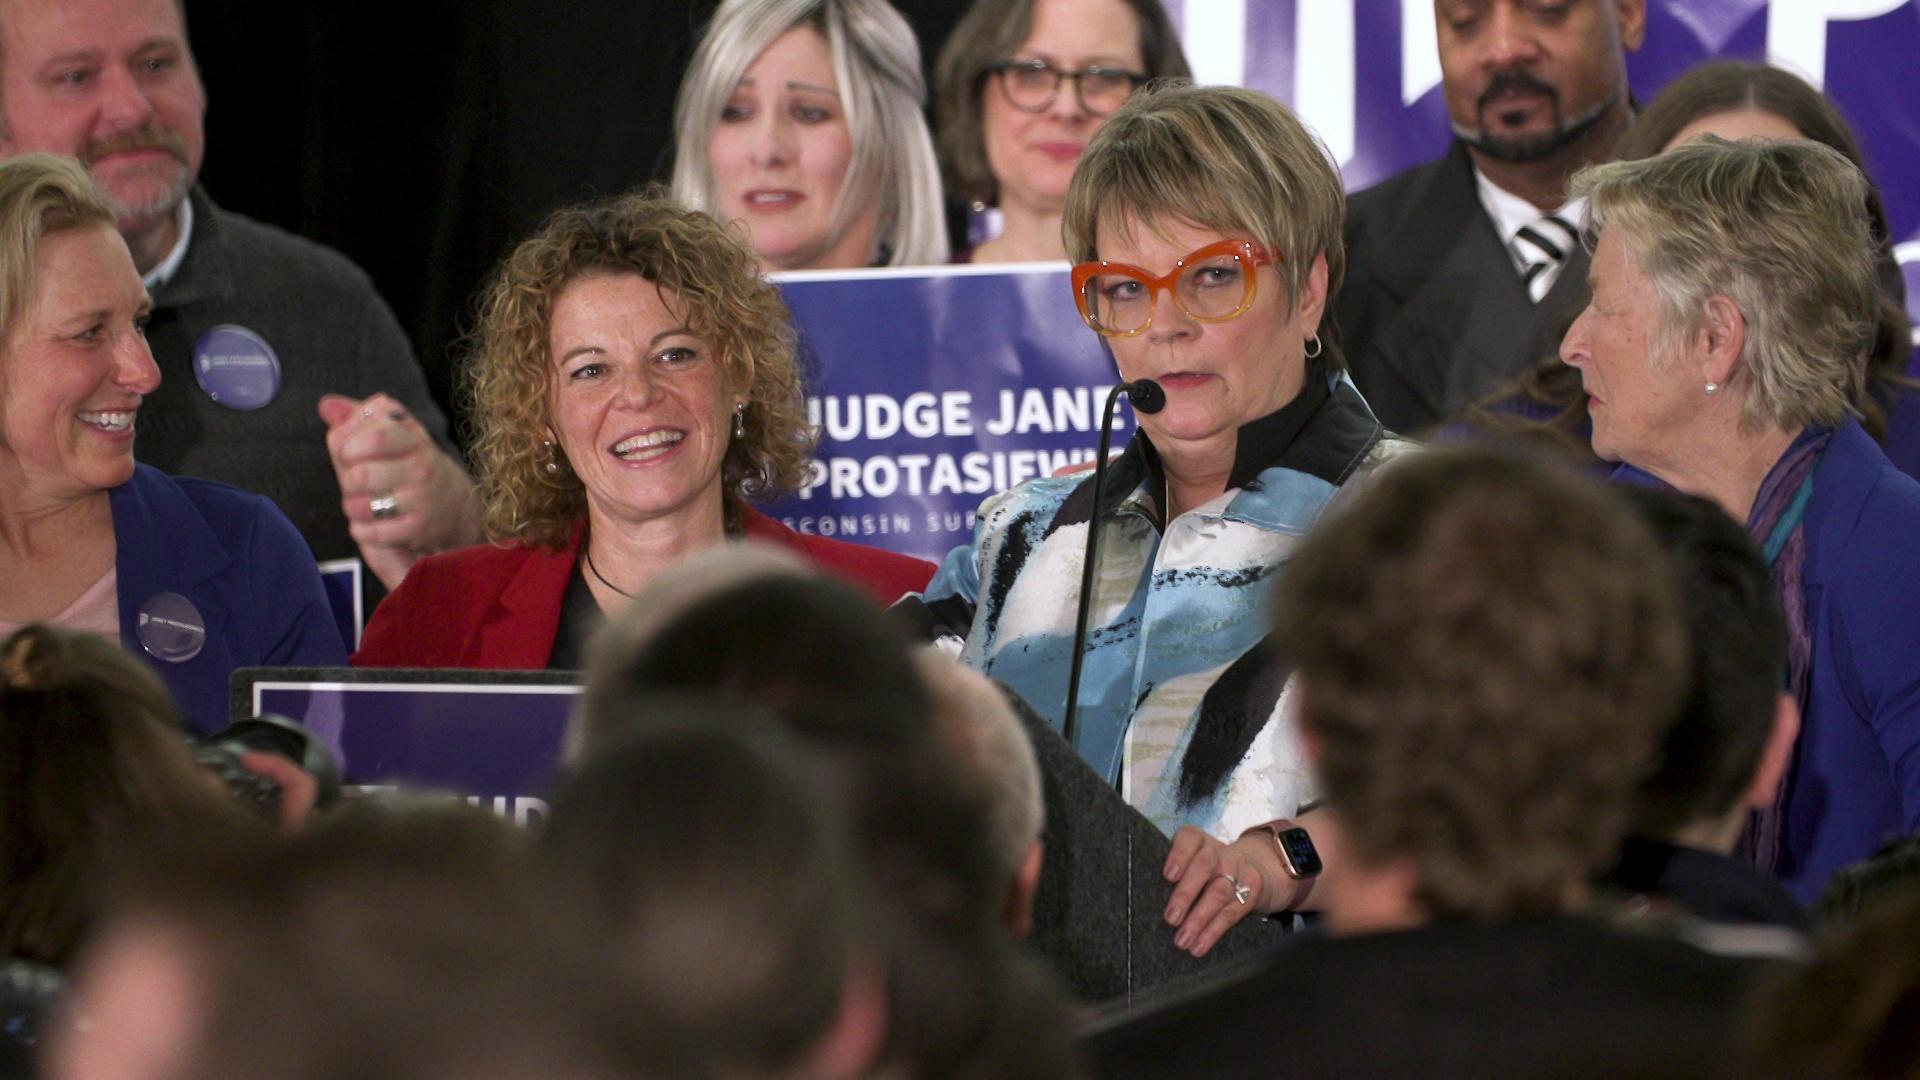 A still image from a video shows Jill Karofsky, Rebecca Dallet, Janet Protasiewicz and Ann Walsh Bradley standing among a crowd of people, with several holding 'Judge Janet Protasiewicz' campaign signs.